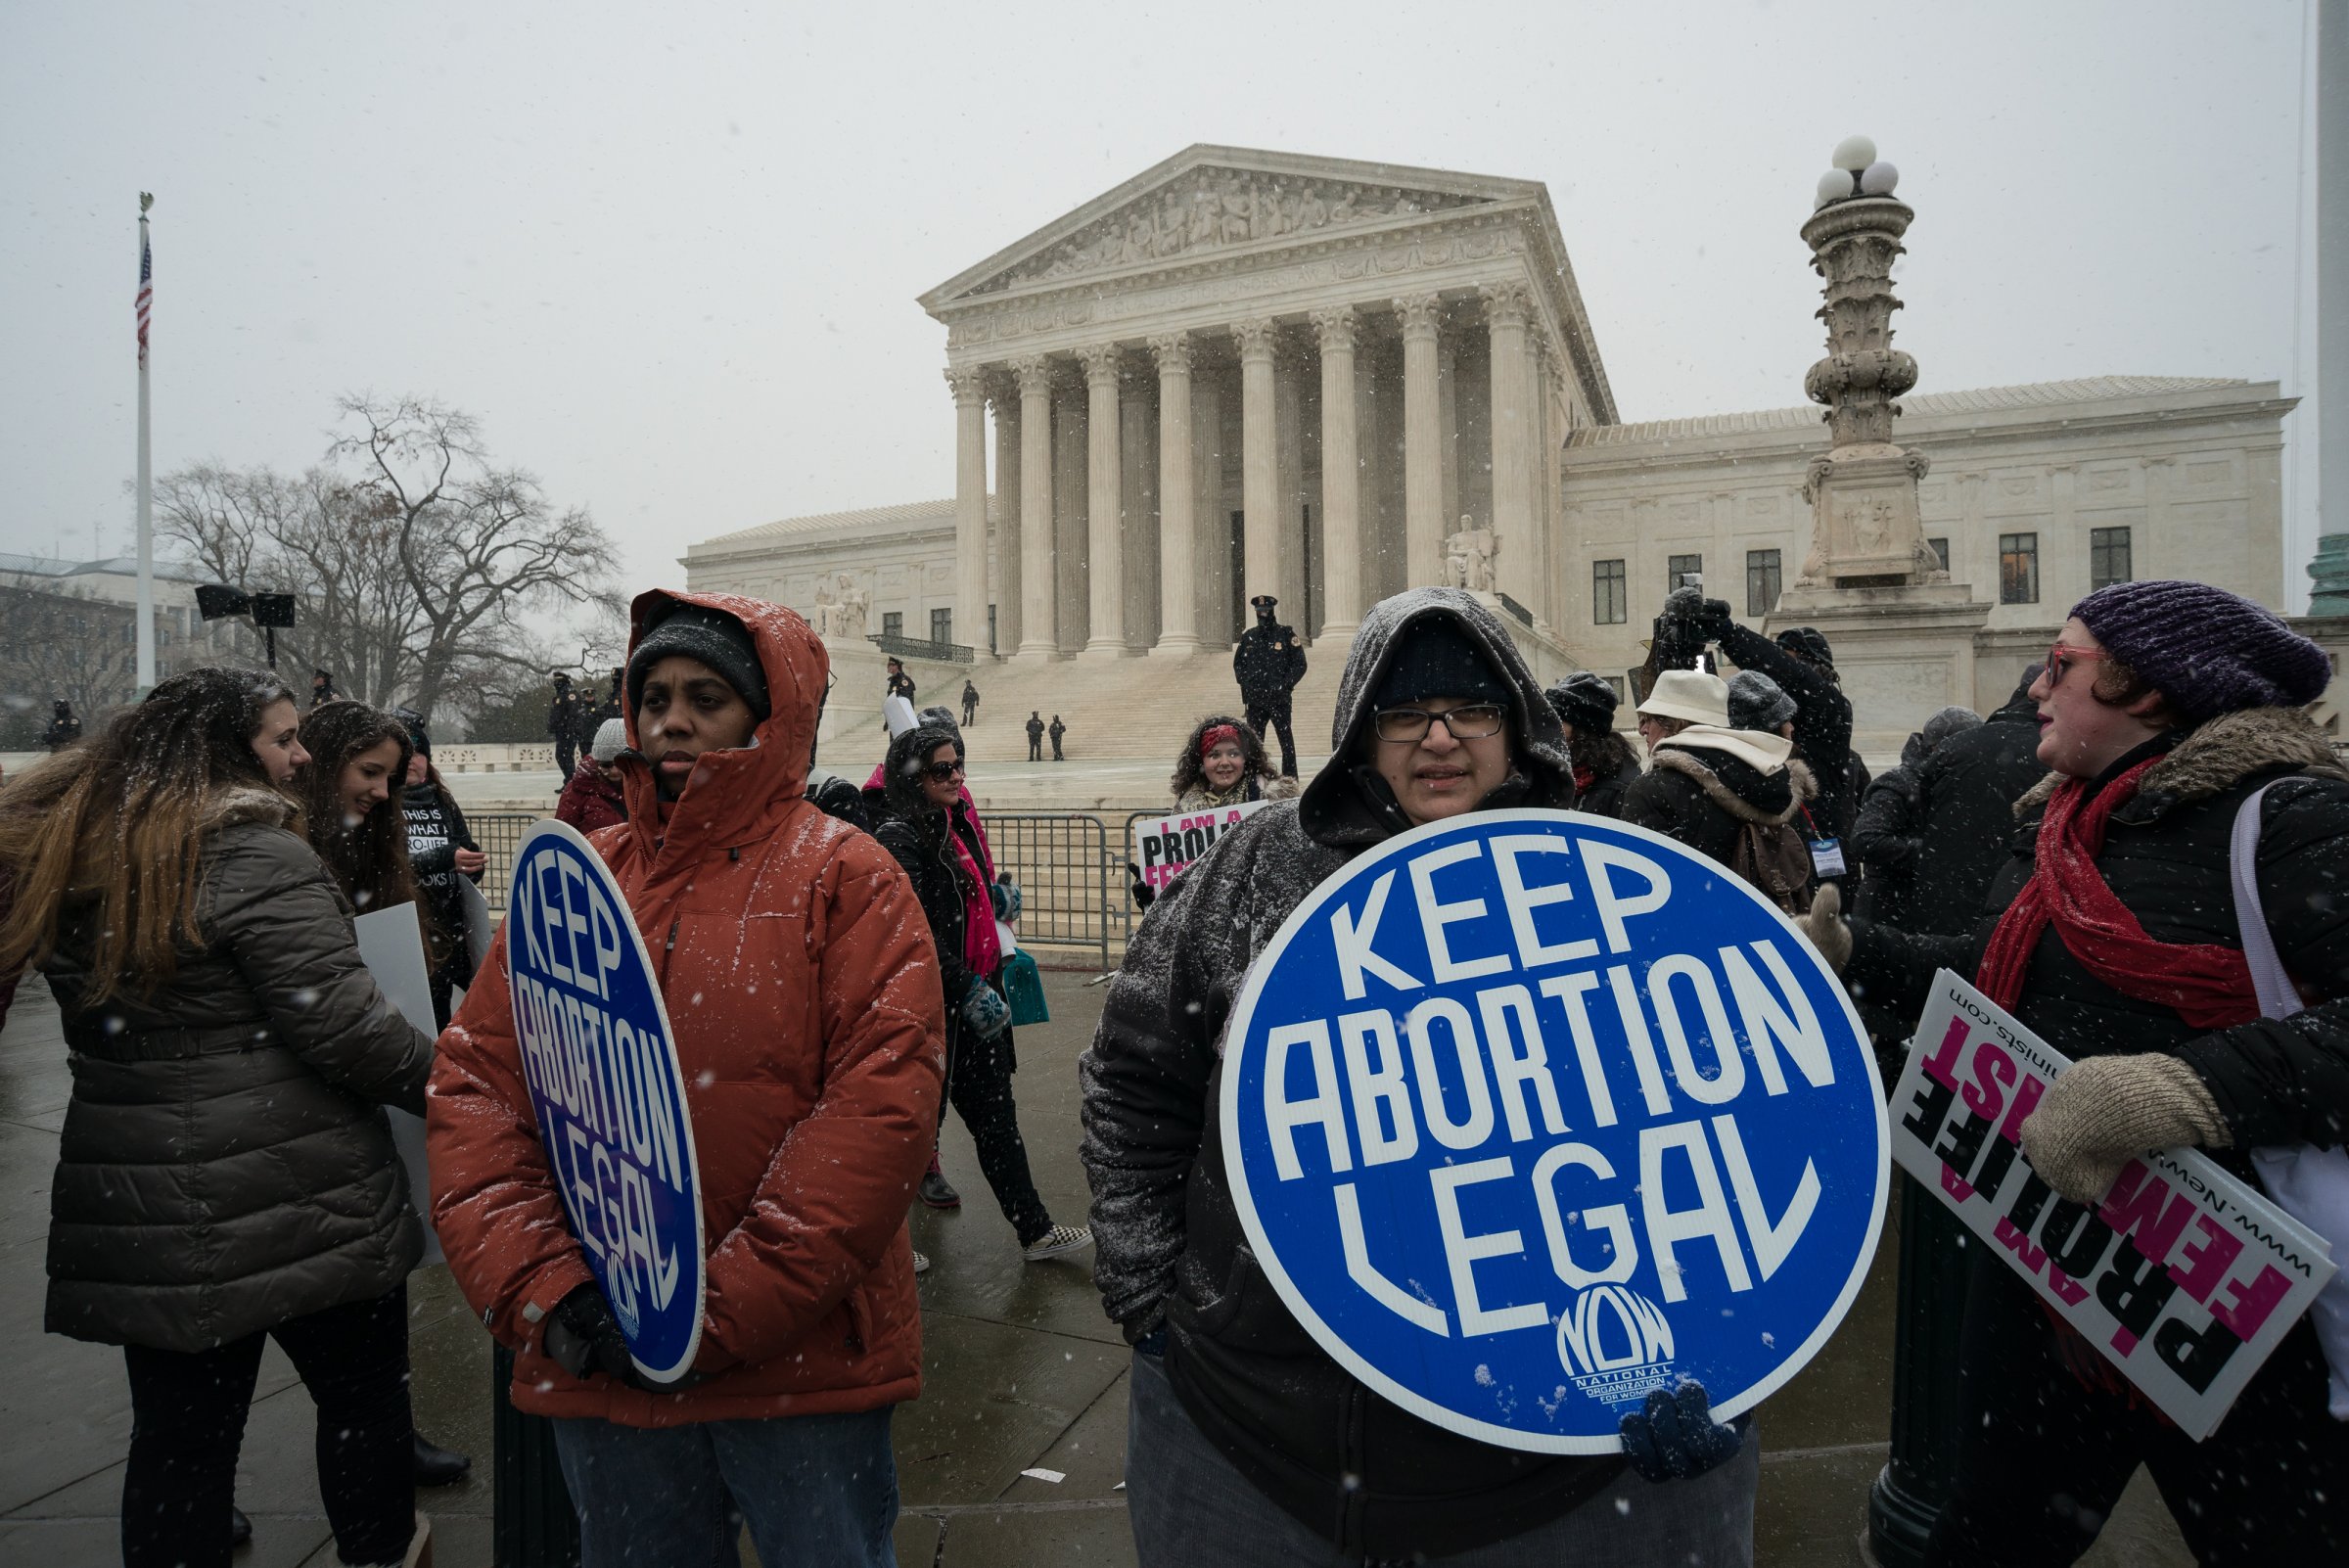 Pro-choice demonstrators stage a counter protest near the